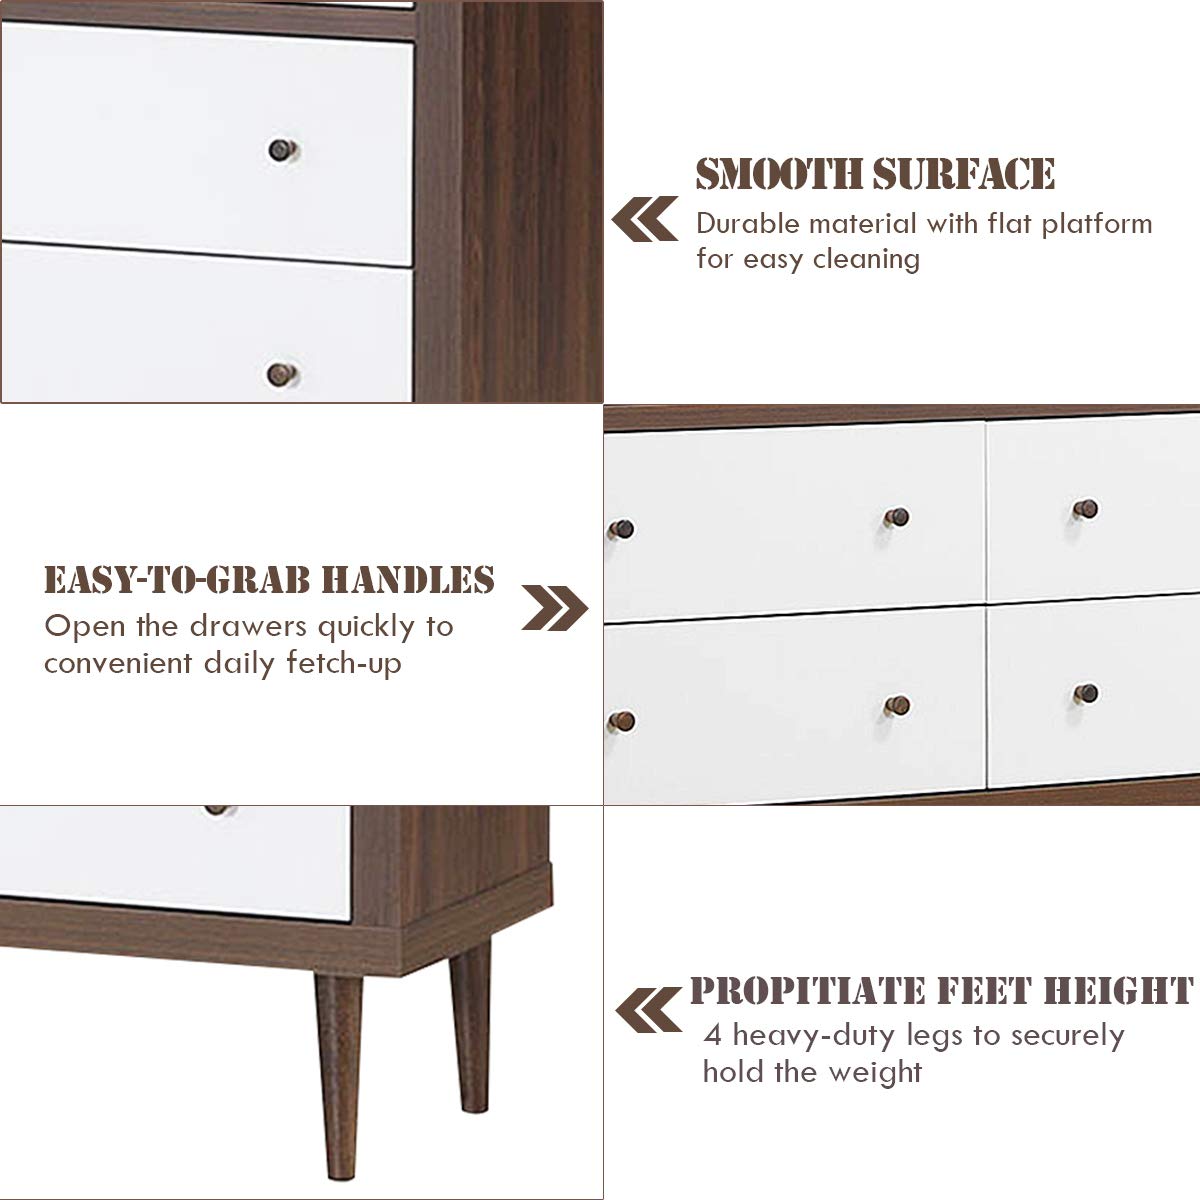 Giantex Drawer Dresser Wooden Chest W/Drawers, Sliding Rail and Stable Frame Antique-Style Free-Standing Chest